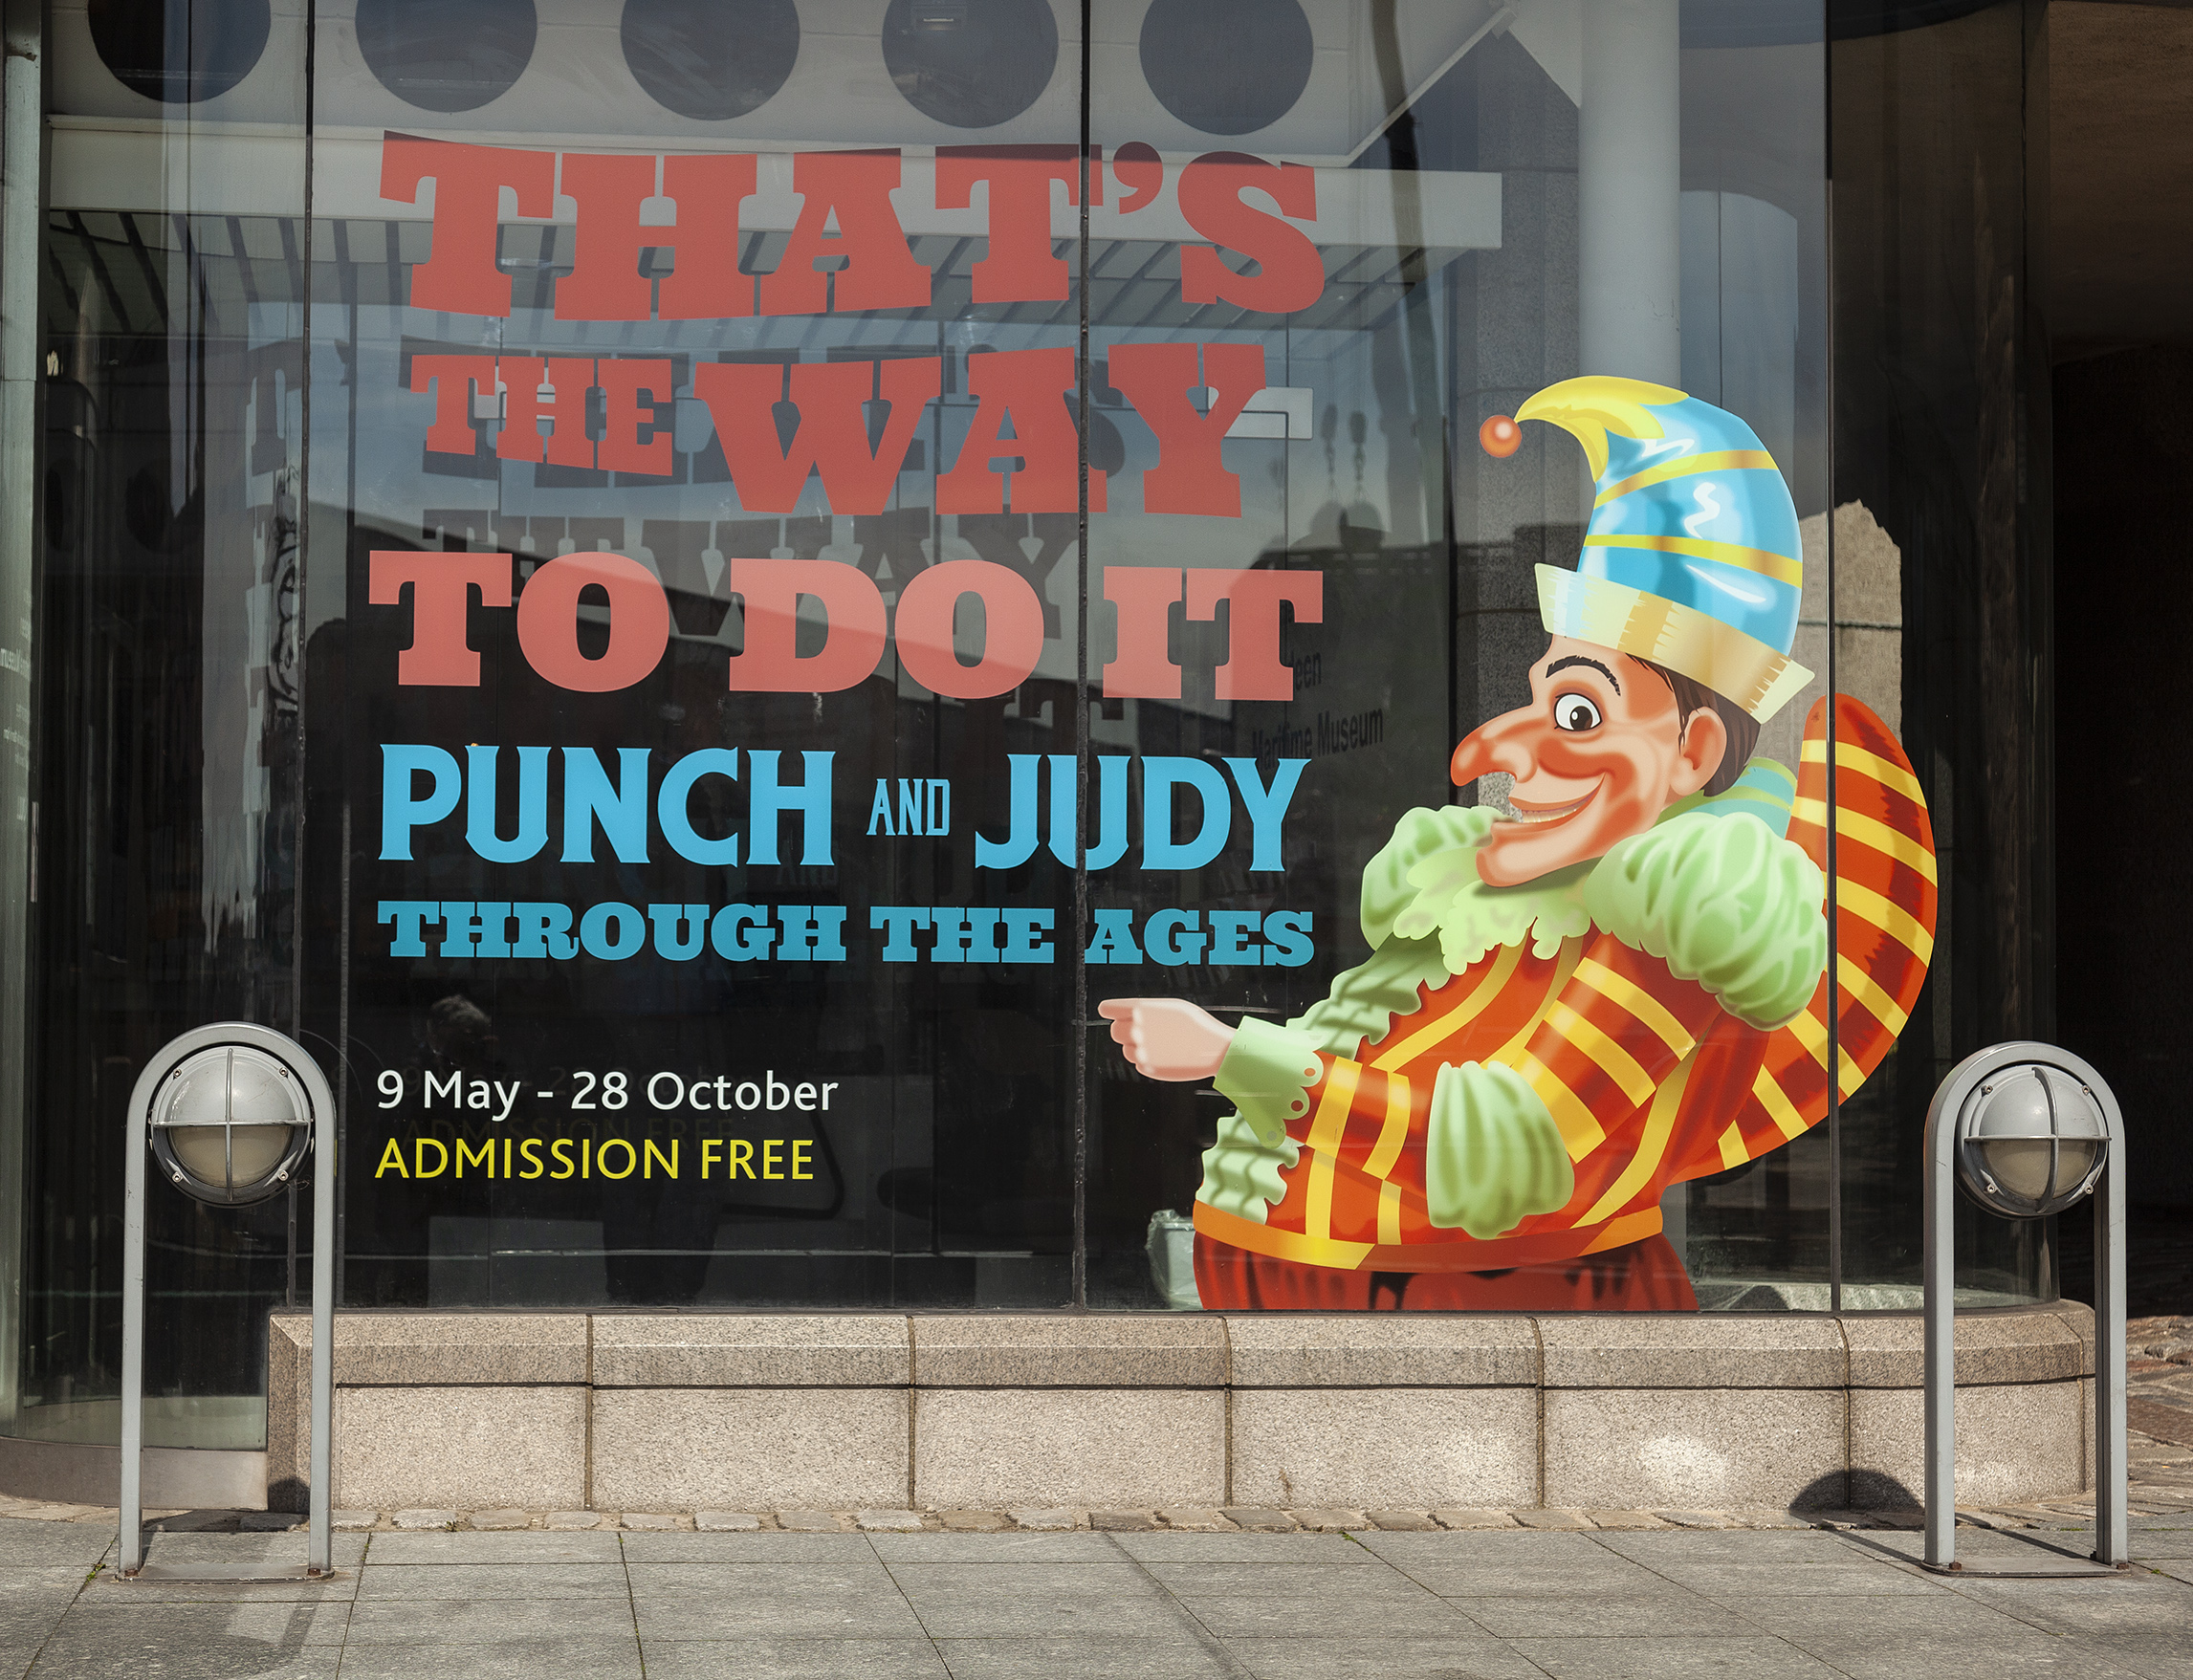 There is a Punch and Judy exhibition on at an Aberdeen museum